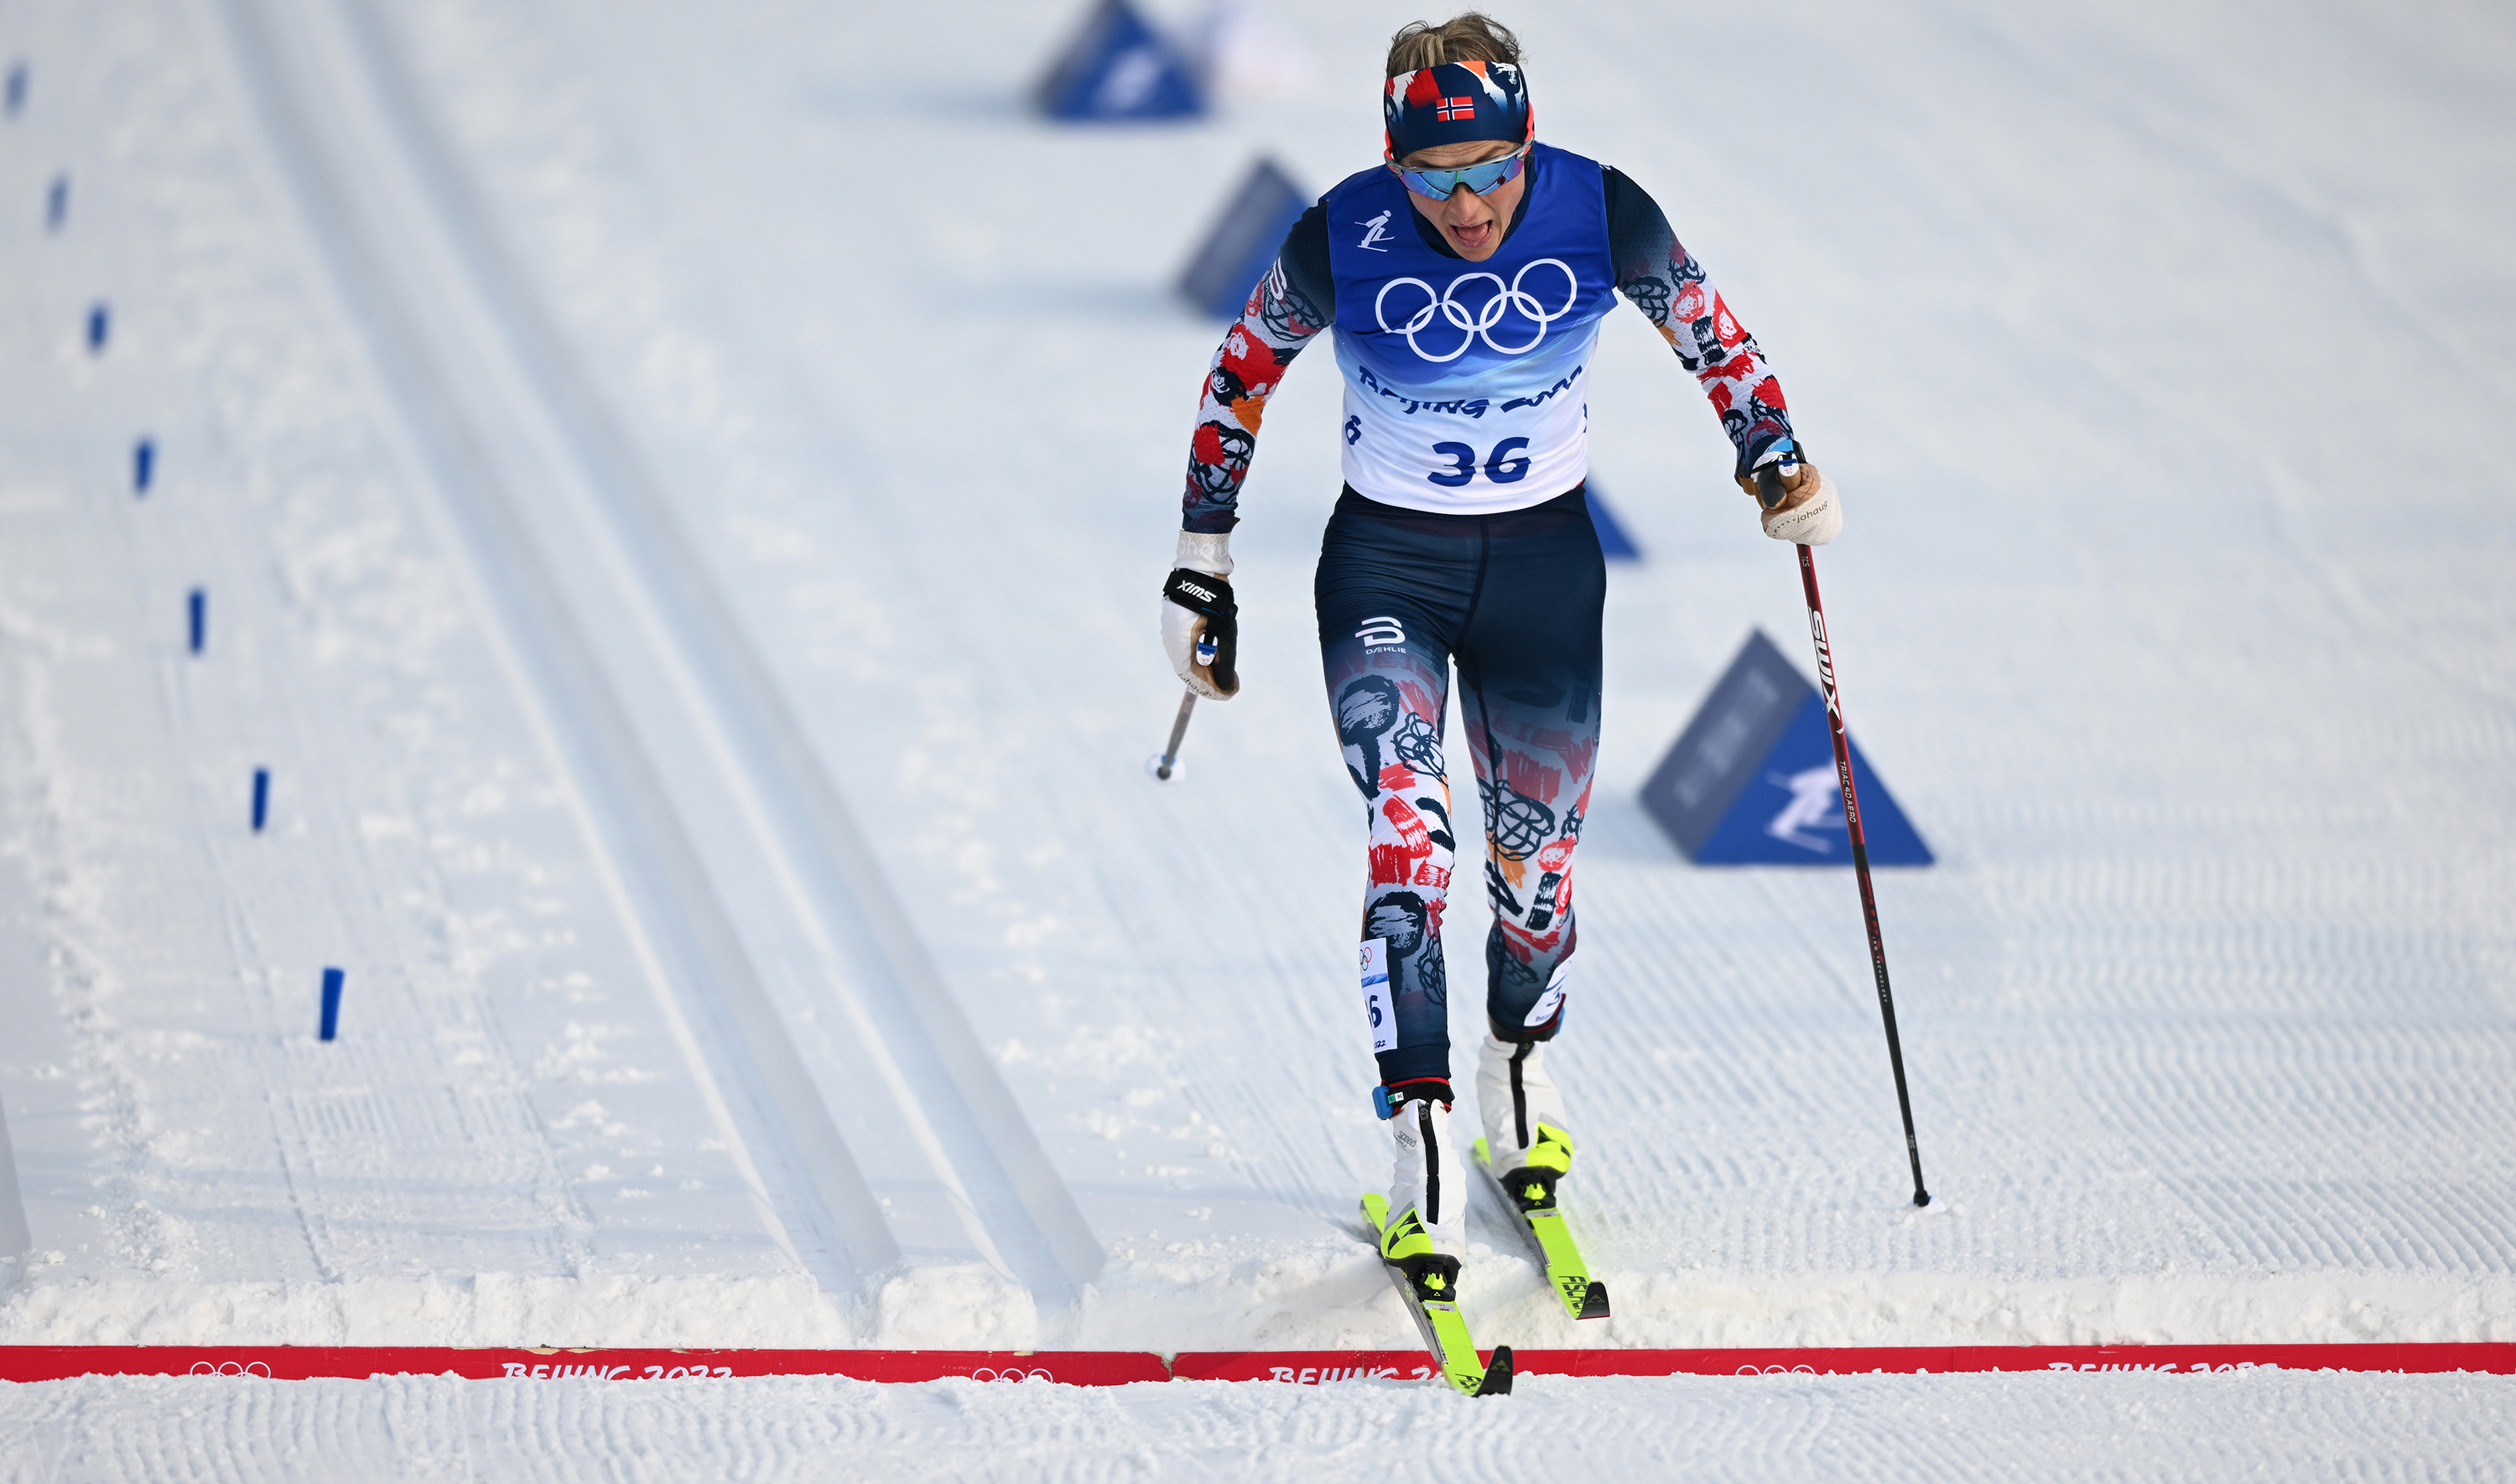 Norway's Therese Johaug crosses the finish line to win her second gold of the Games.